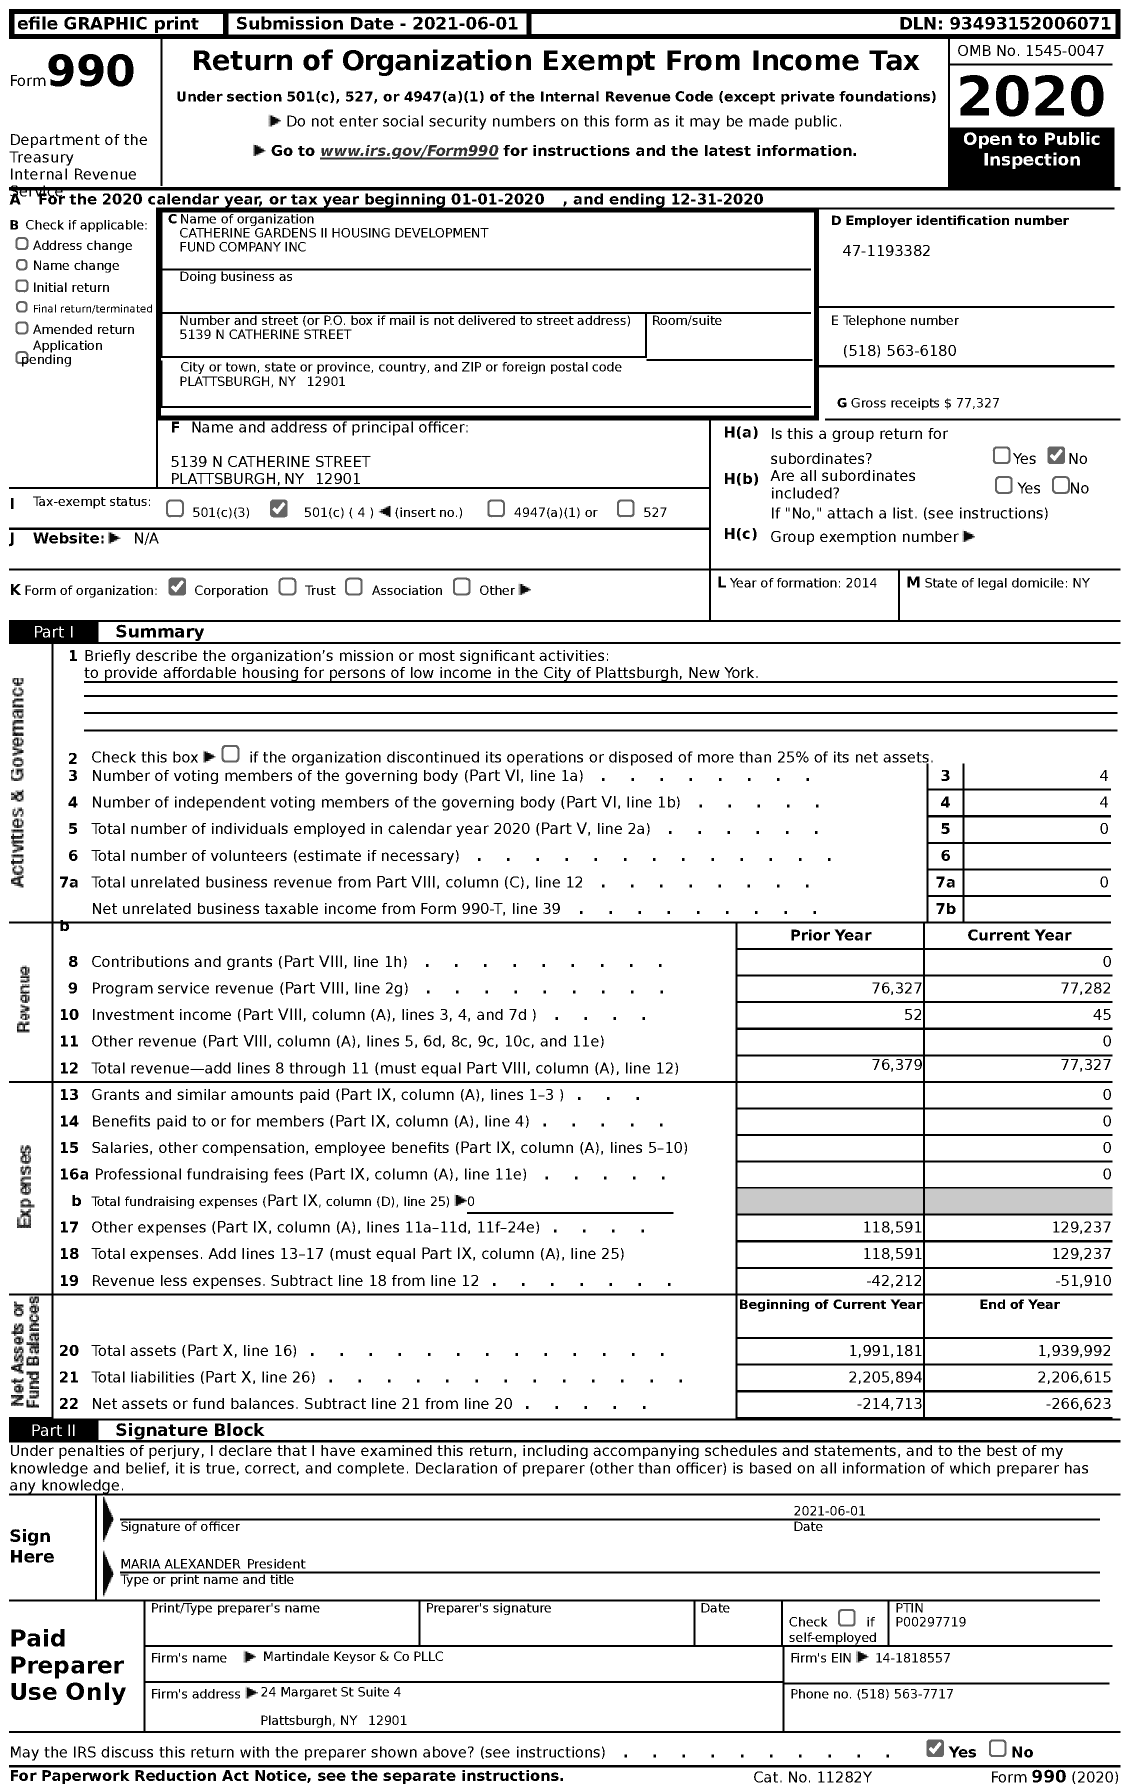 Image of first page of 2020 Form 990 for Catherine Gardens Ii Housing Development Fund Company